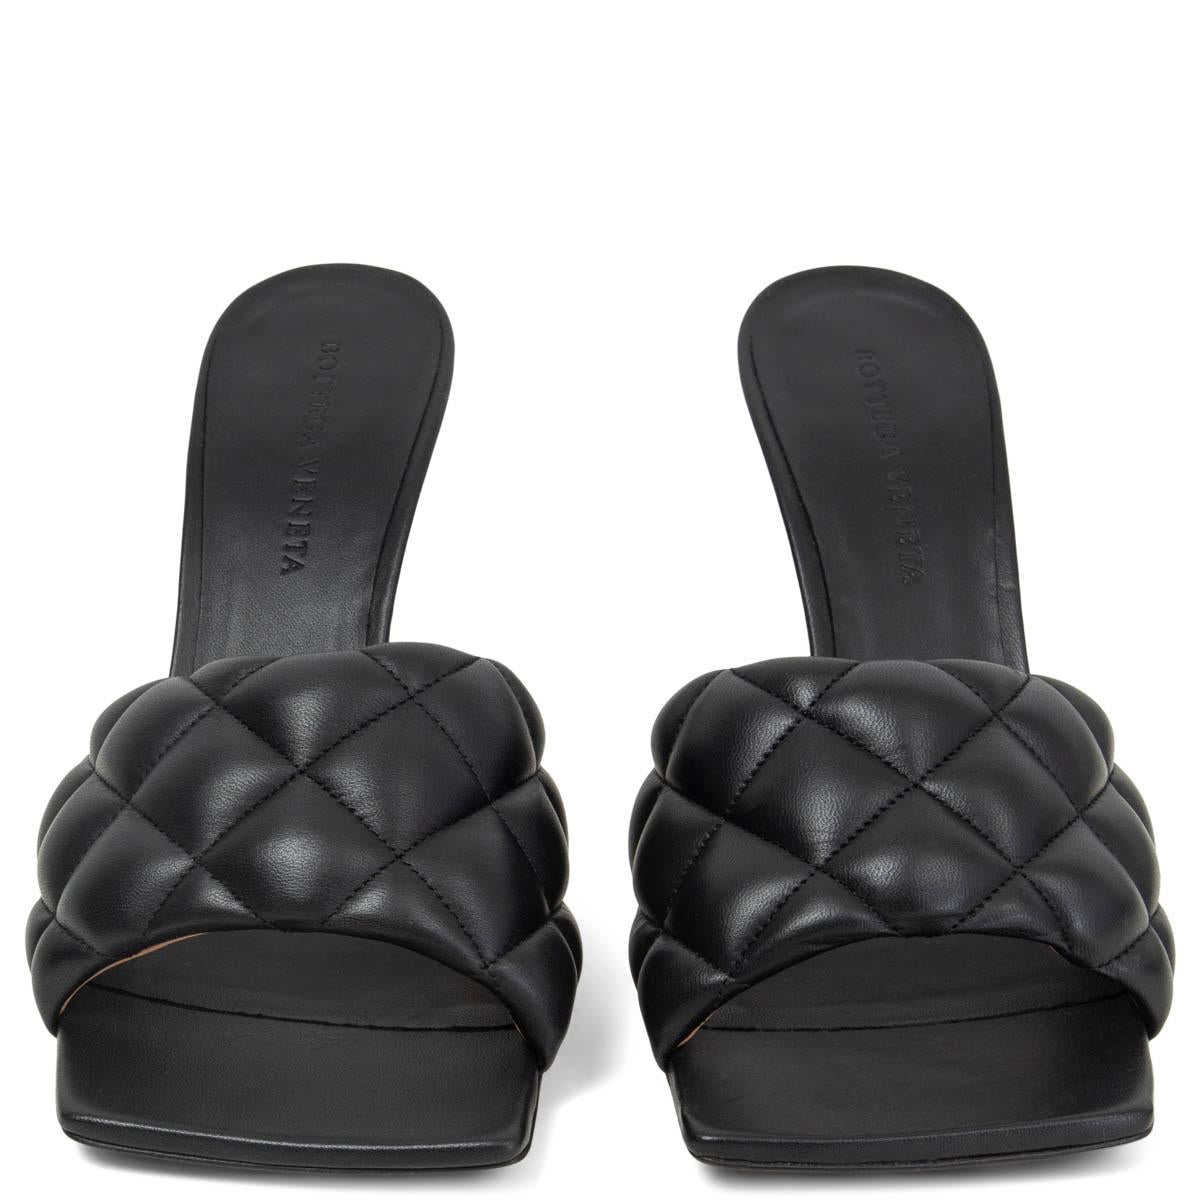 100% authentic Bottega Veneta padded mule sandals in black smooth leather. Brand new. Come with dust bag. 

Measurements
Imprinted Size	39
Shoe Size	39
Inside Sole	26cm (10.1in)
Width	8cm (3.1in)
Heel	10cm (3.9in)

All our listings include only the